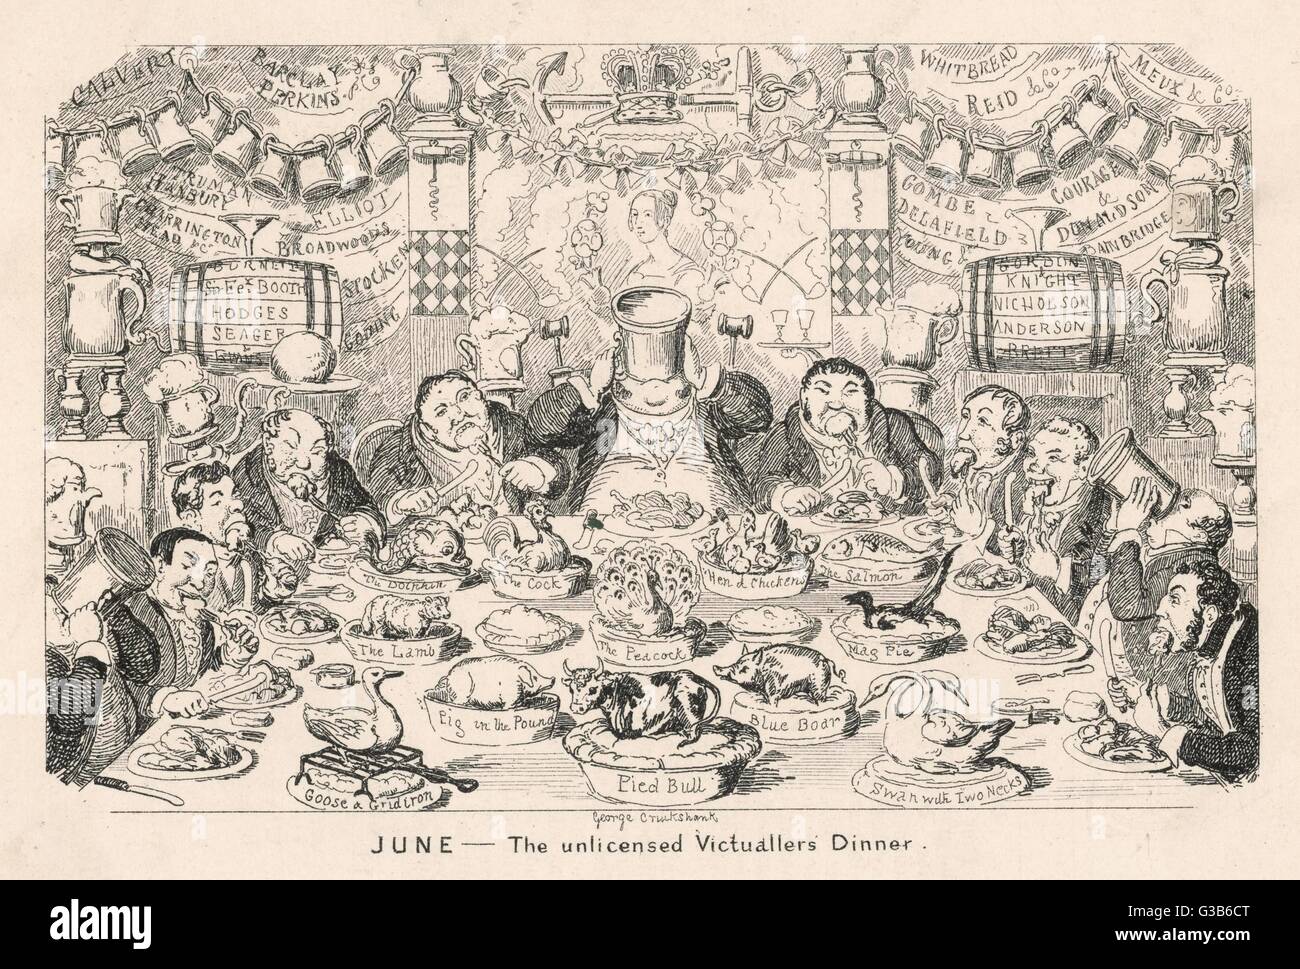 June - The unlicensed  Victuallers' Dinner  Gentlemen tuck into a wide  array of dishes including  peacock, magpie and dolphin     Date: 1841 Stock Photo